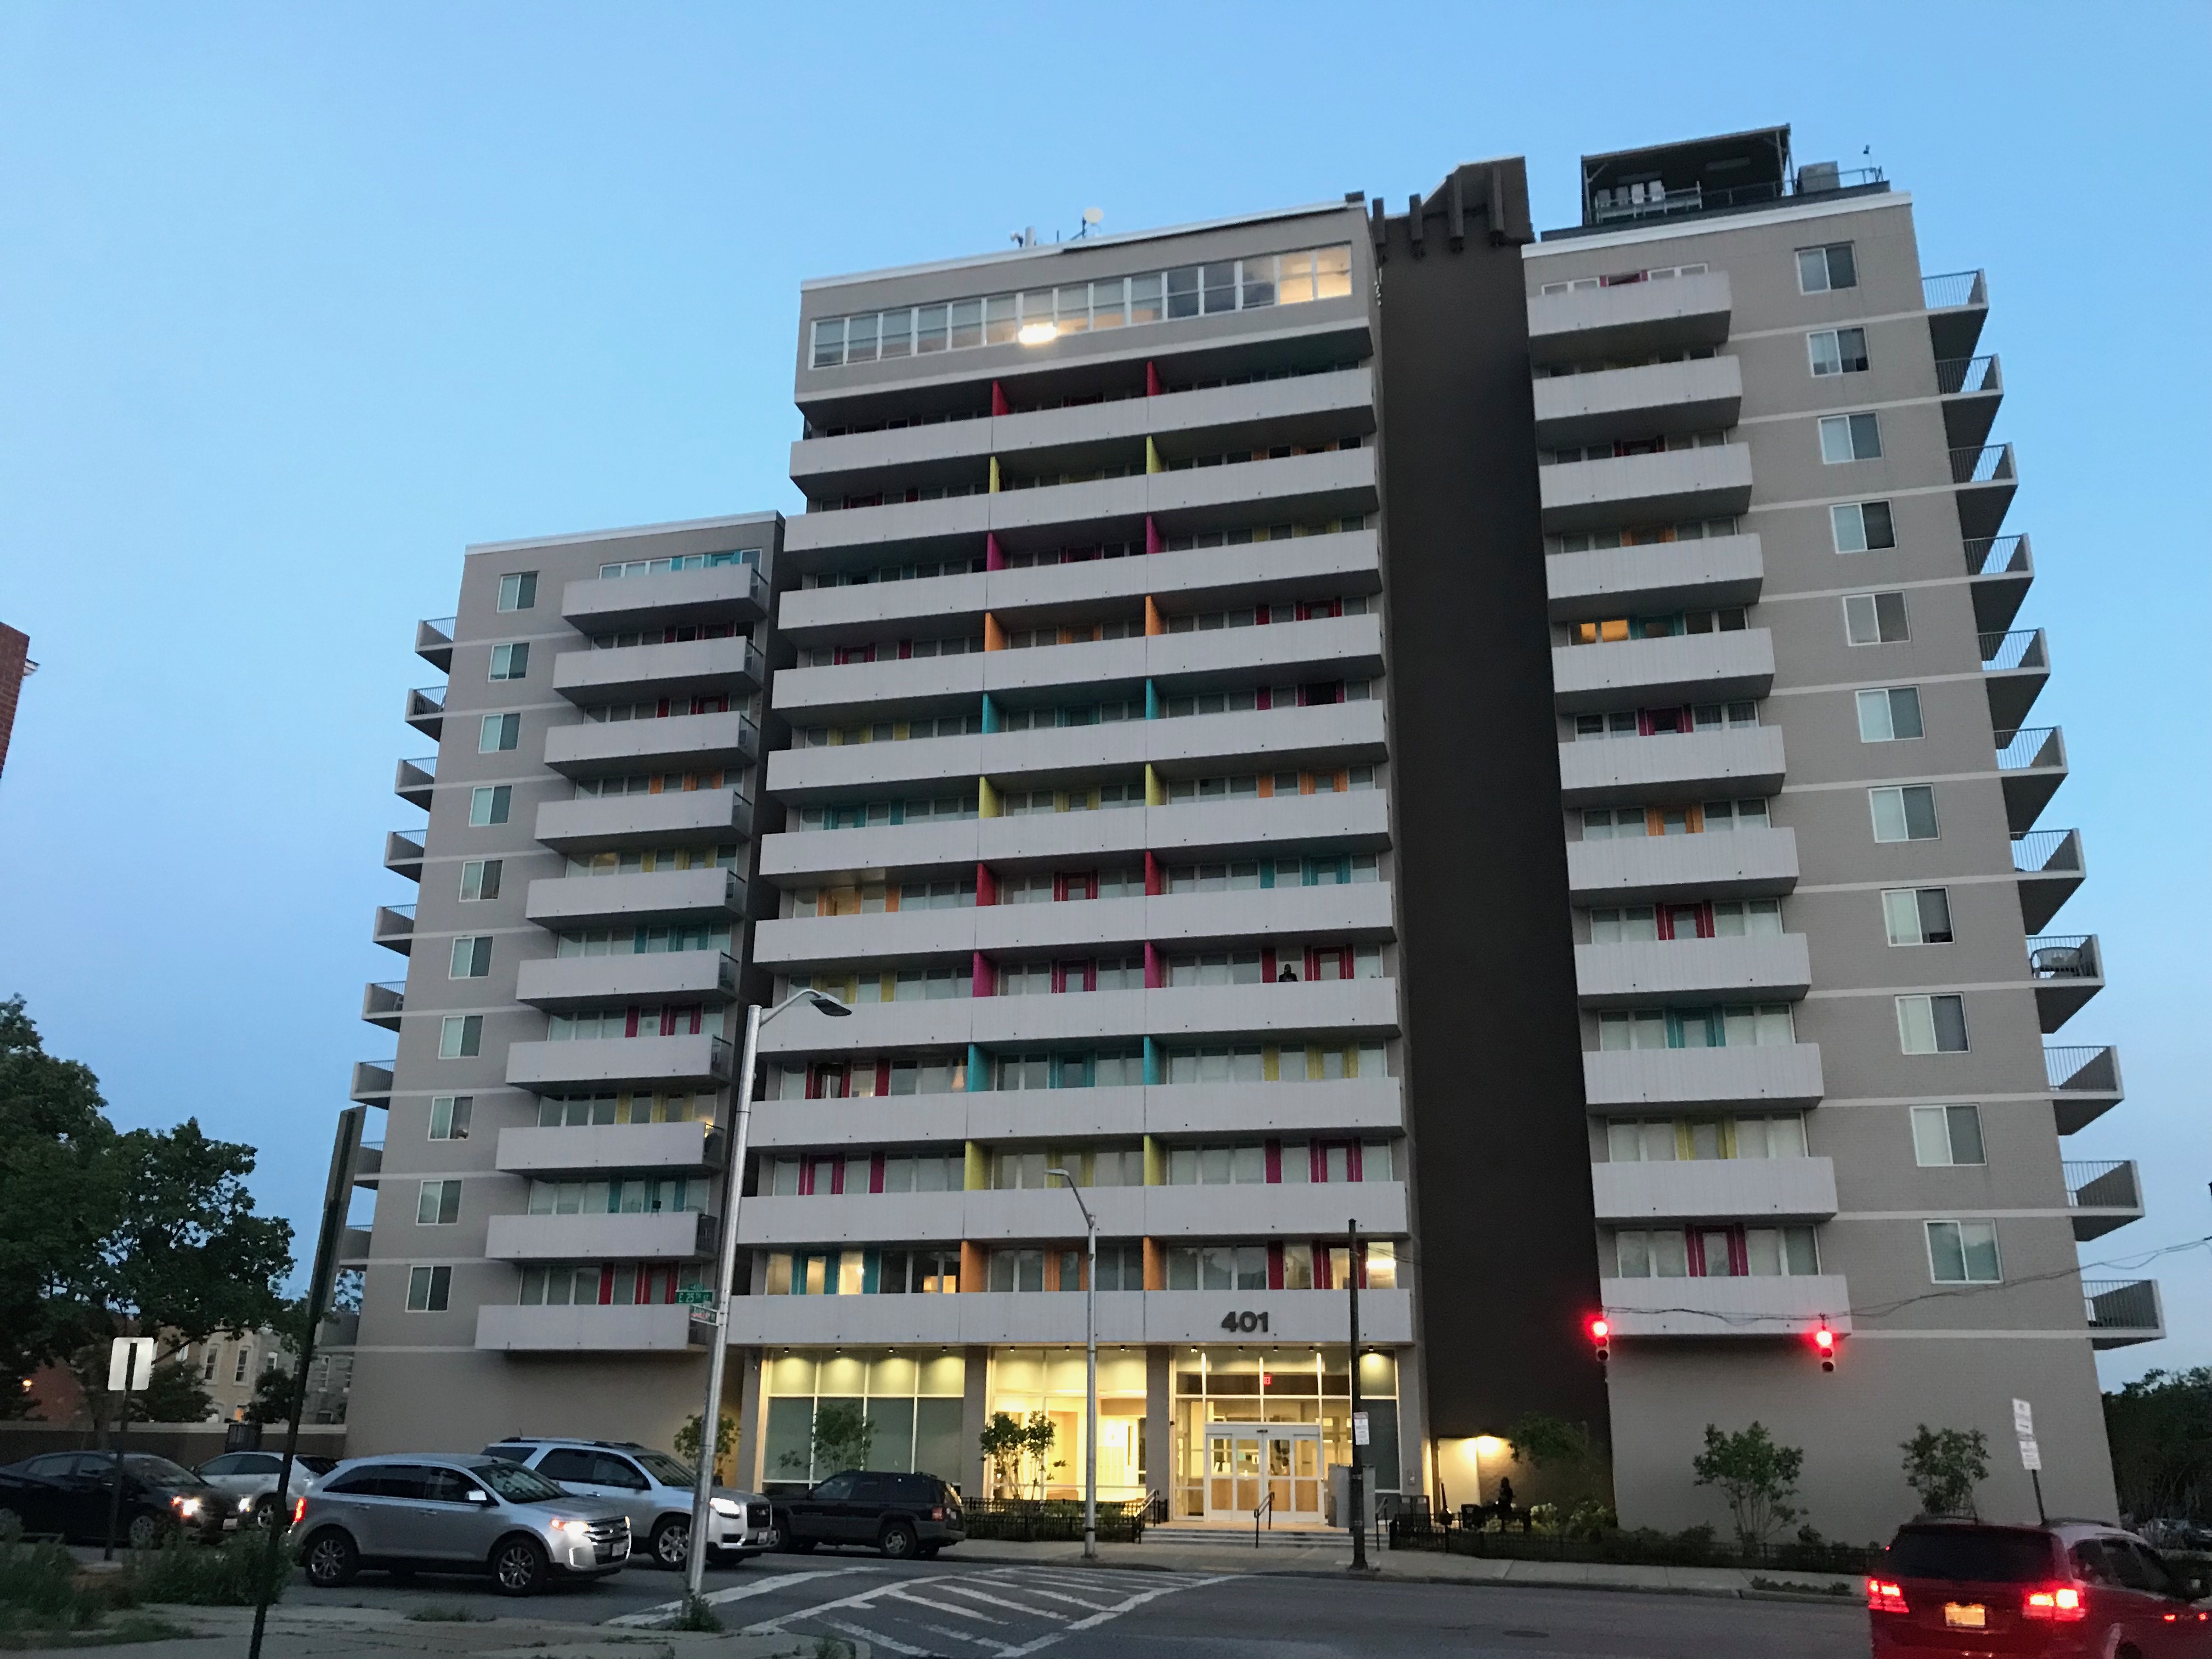 The Brentwood (1976), 401 E. 25th Street, Baltimore, MD 21218, 25th Street, Apartment building, Apartments, Architecture, HQ Photo